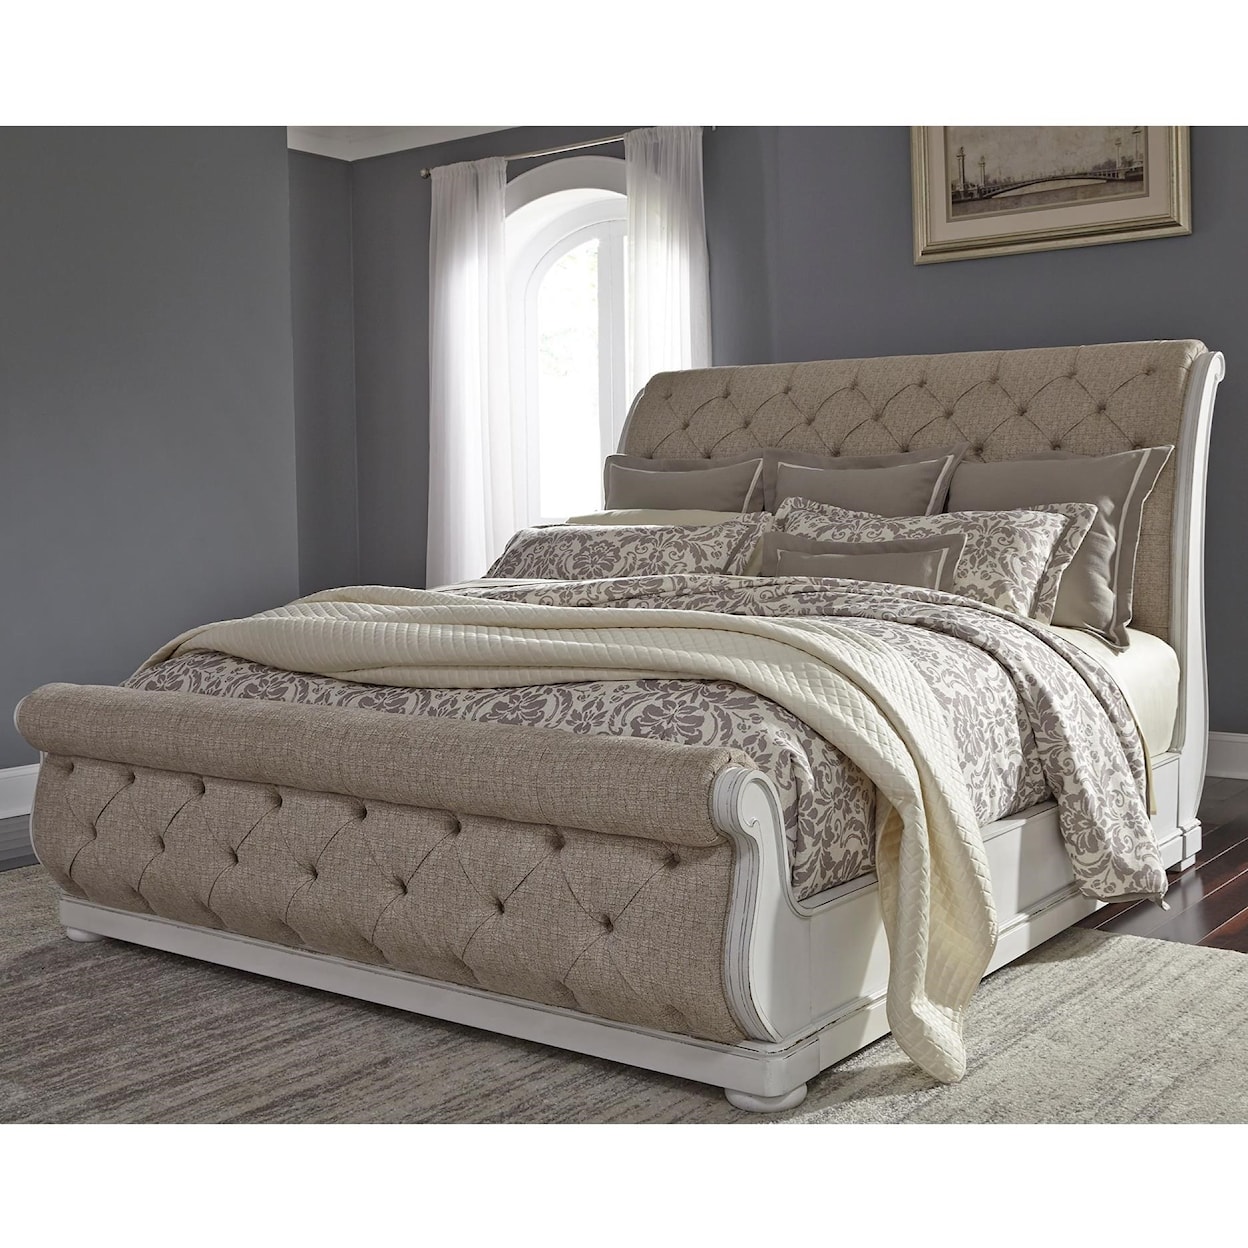 Liberty Furniture Abbey Park California King Sleigh Bed